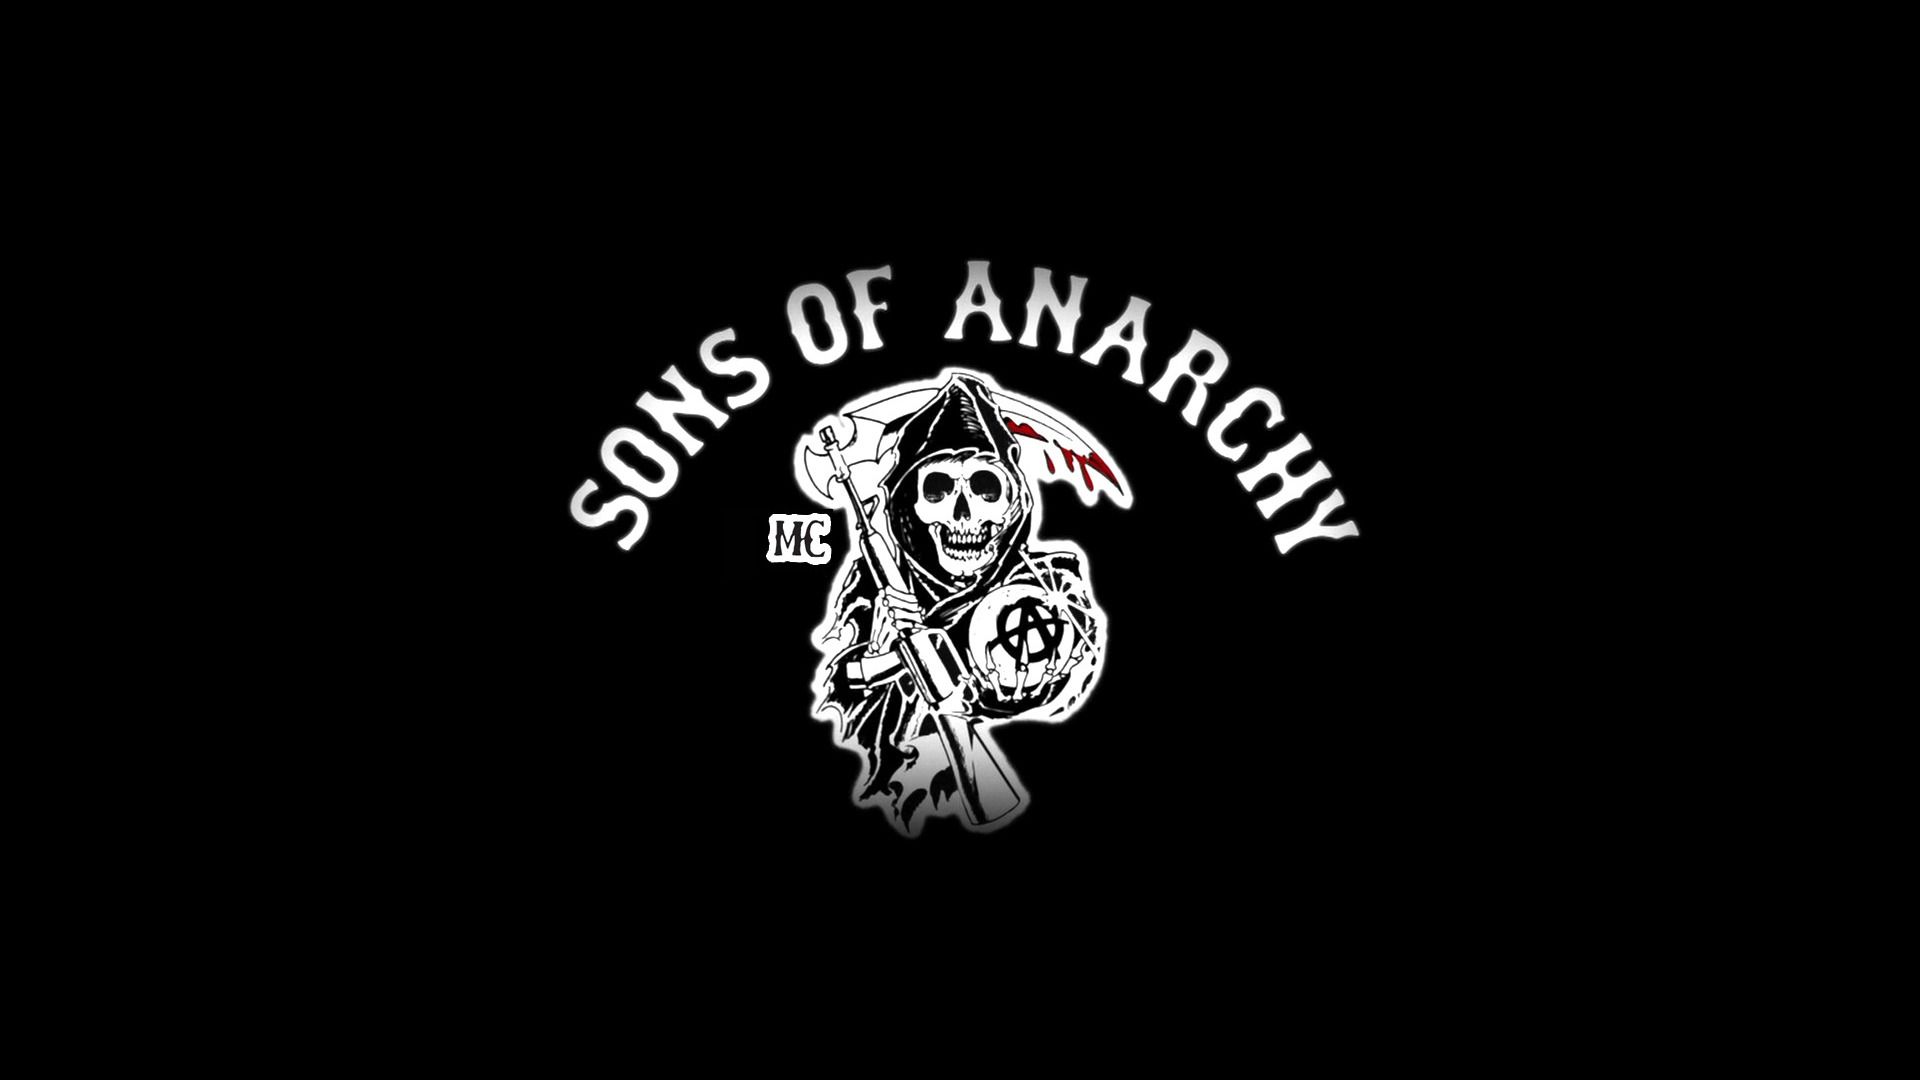 Sons Of Anarchy Logo HD Wallpaper In Resolutions For Desktop